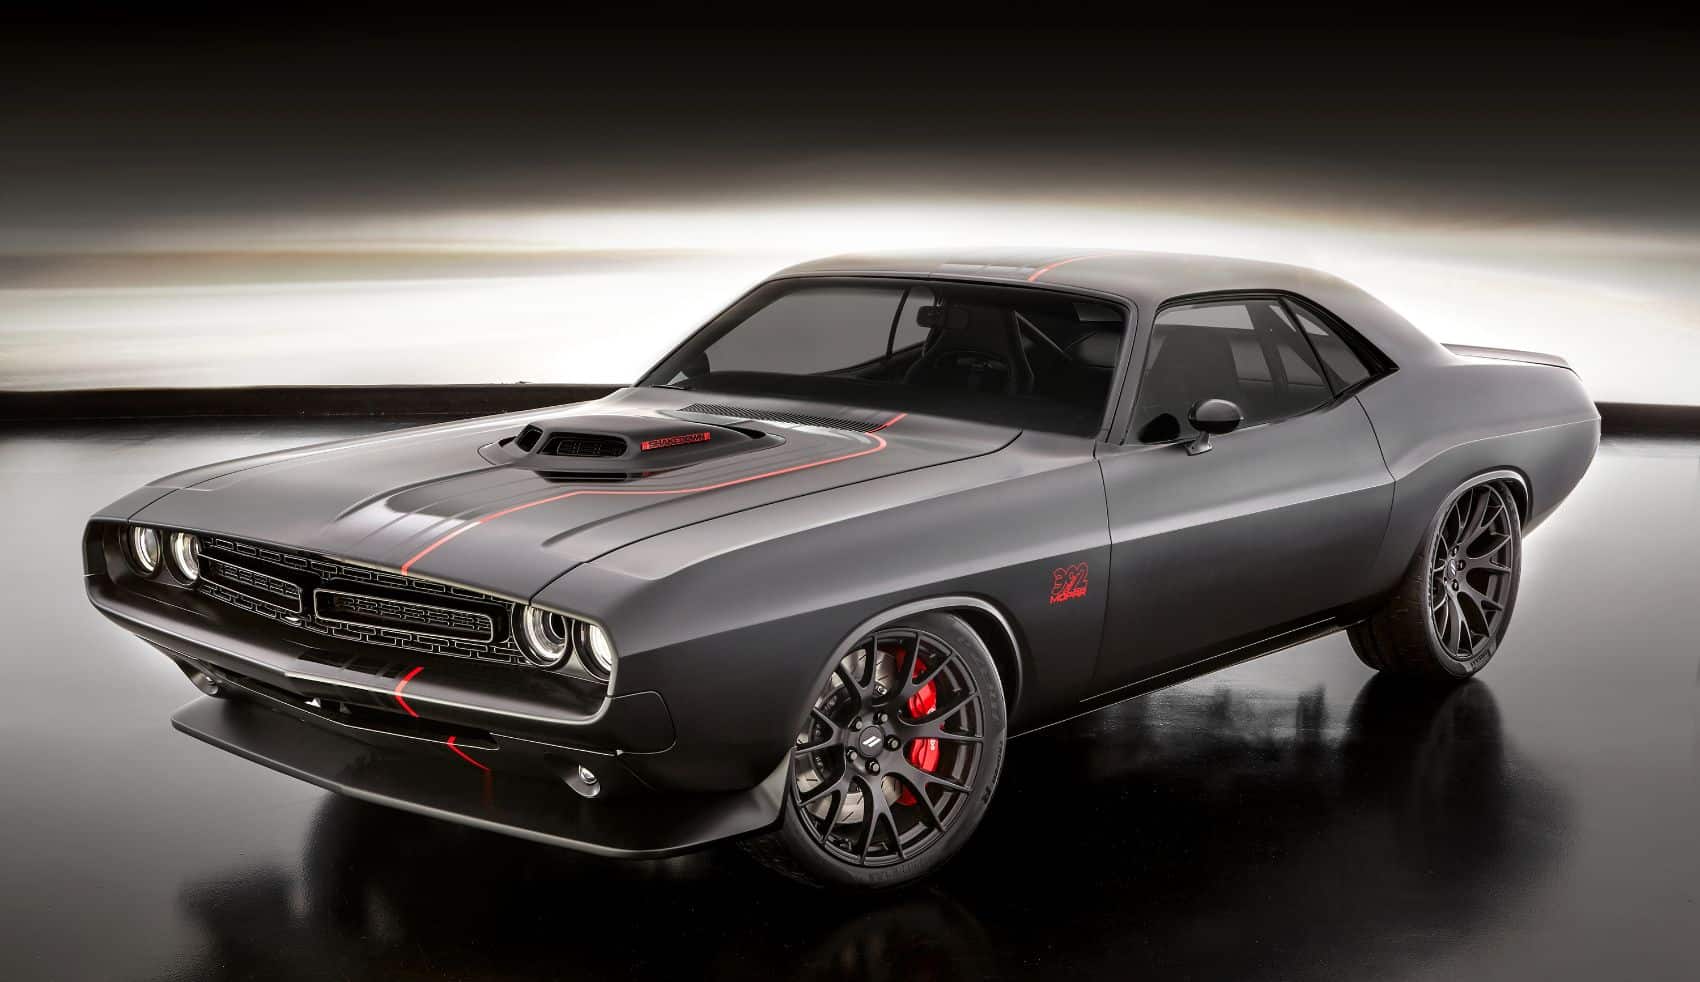 The New 2023 Dodge Challenger Concept